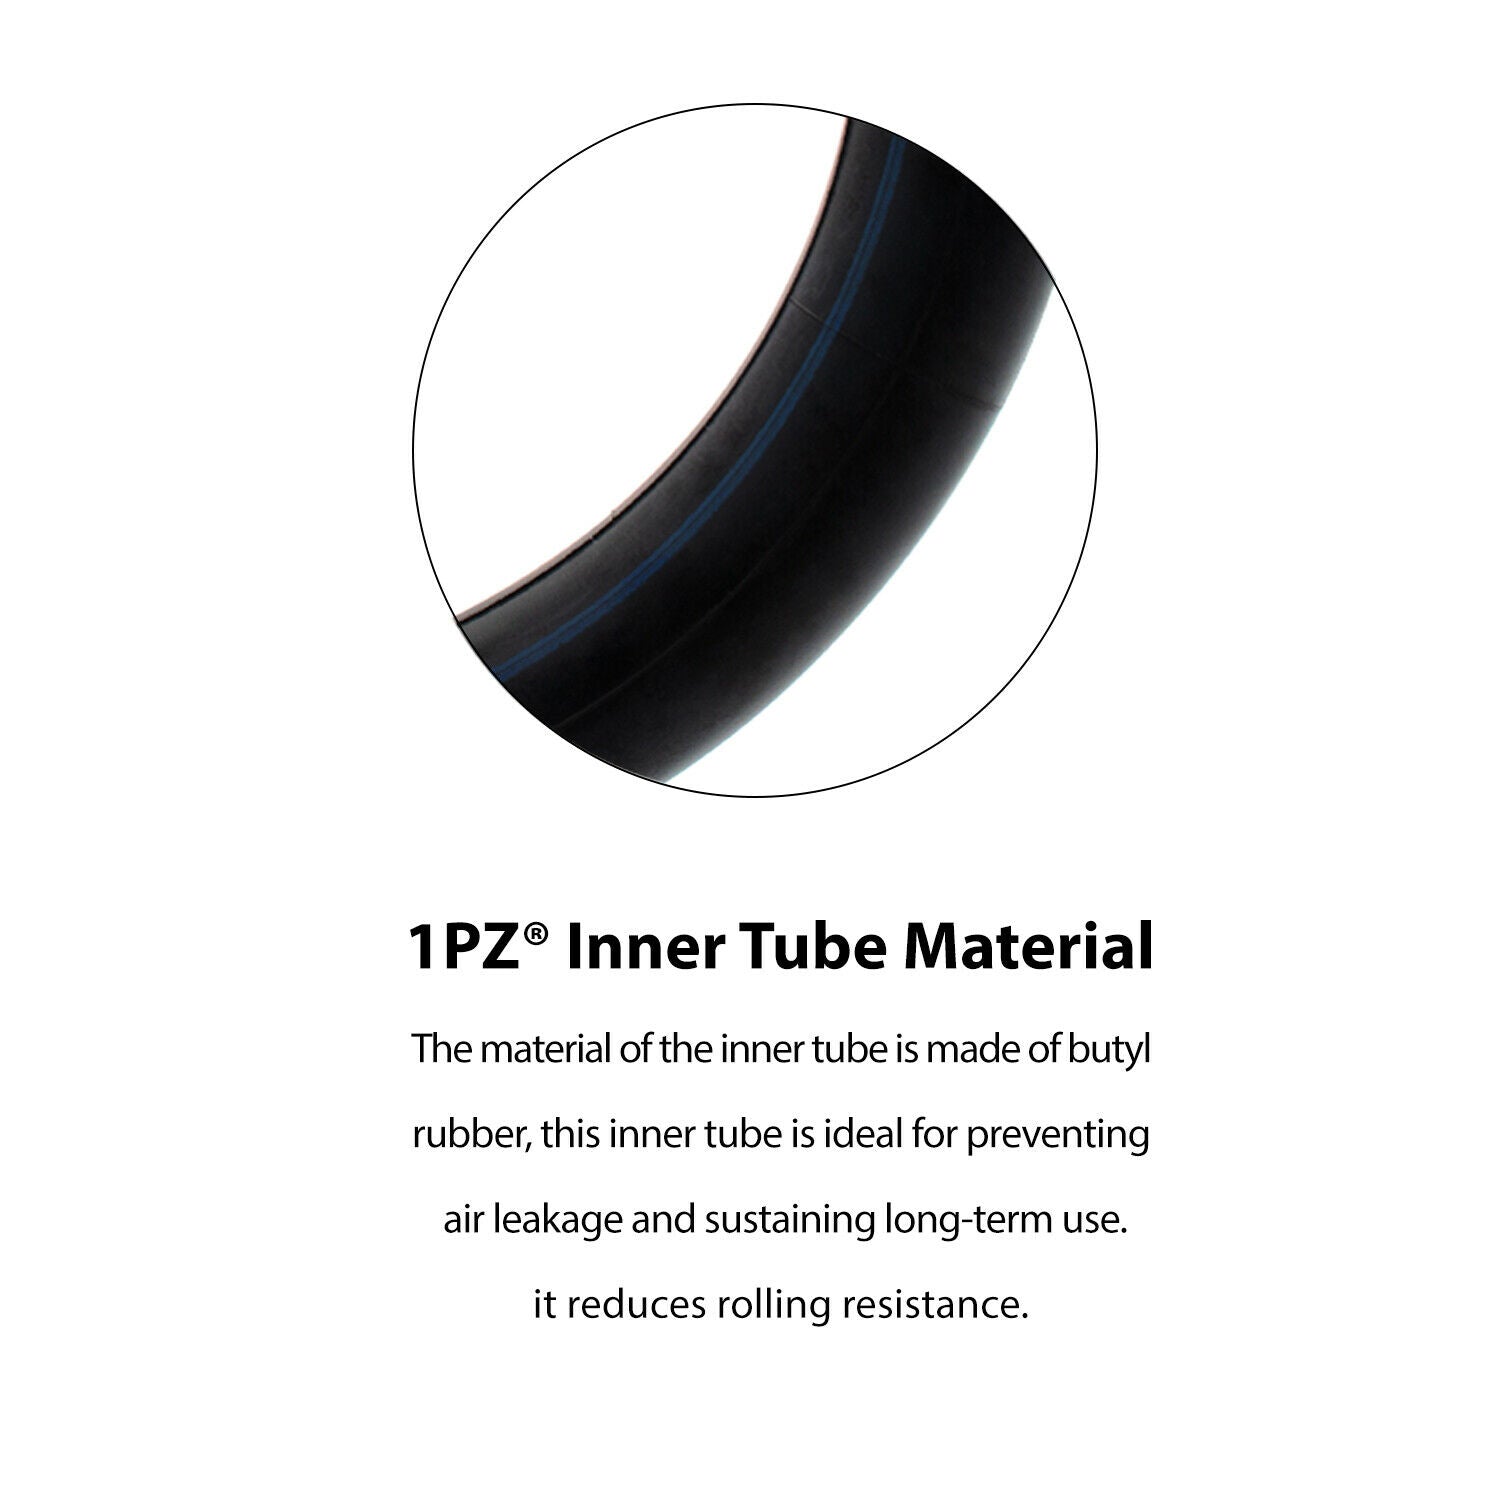 1PZ 12 1/2"x2 1/4" (12.5x2.25) Inner Tube for Razor Pocket Mod Bella Chrissy Hannah Montana Electric Scooters Razor MX125 Dirt Rocket Replacement Inner Tube with TR87 Bent Valve Stem